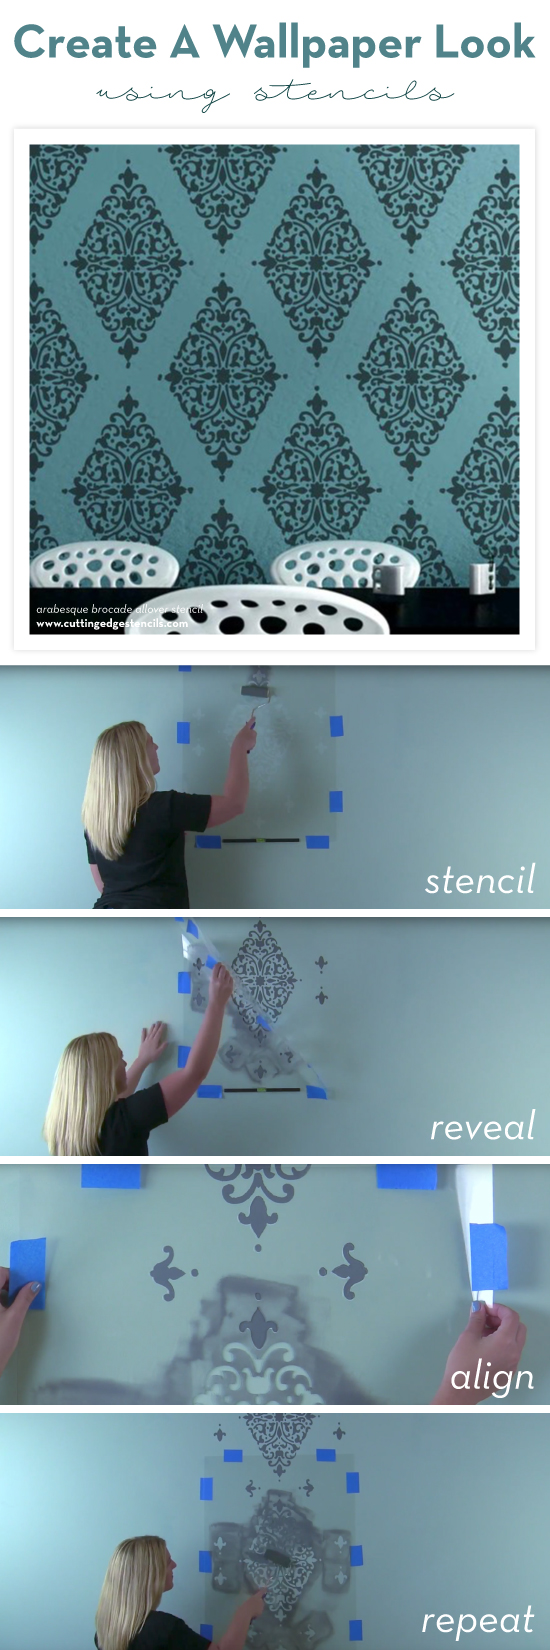 Cutting Edge Stencils shares how to stencil a wallpaper look on an accent wall using the Arabesque Brocade Damask Stencil. http://www.cuttingedgestencils.com/damask-stencil-arabesque-brocade-moroccan-stencils-for-walls.html